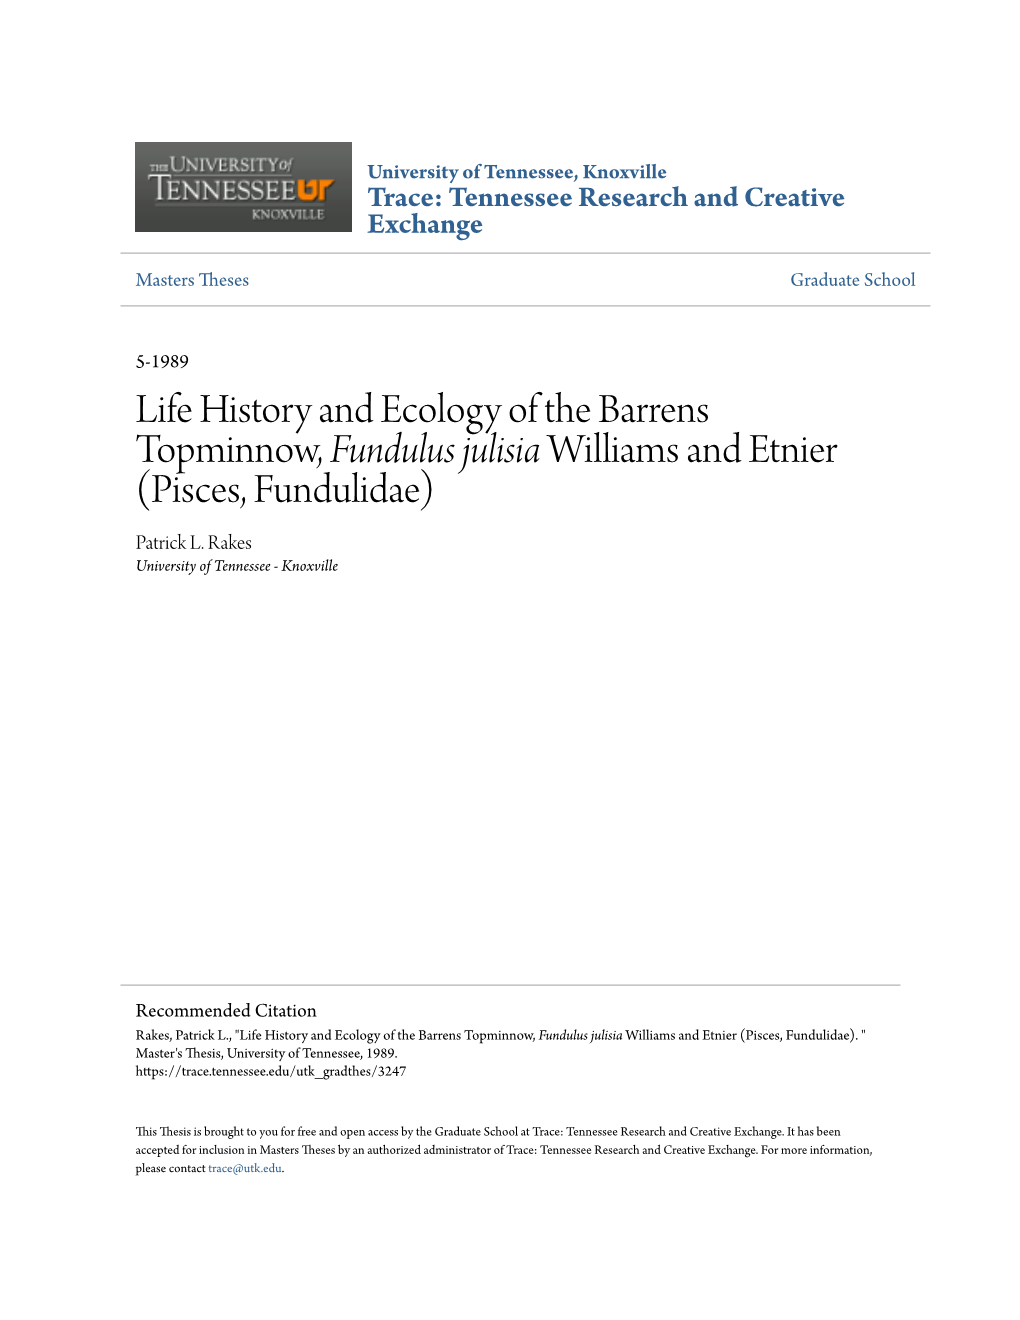 Life History and Ecology of the Barrens Topminnow, Fundulus Julisia Williams and Etnier (Pisces, Fundulidae) Patrick L